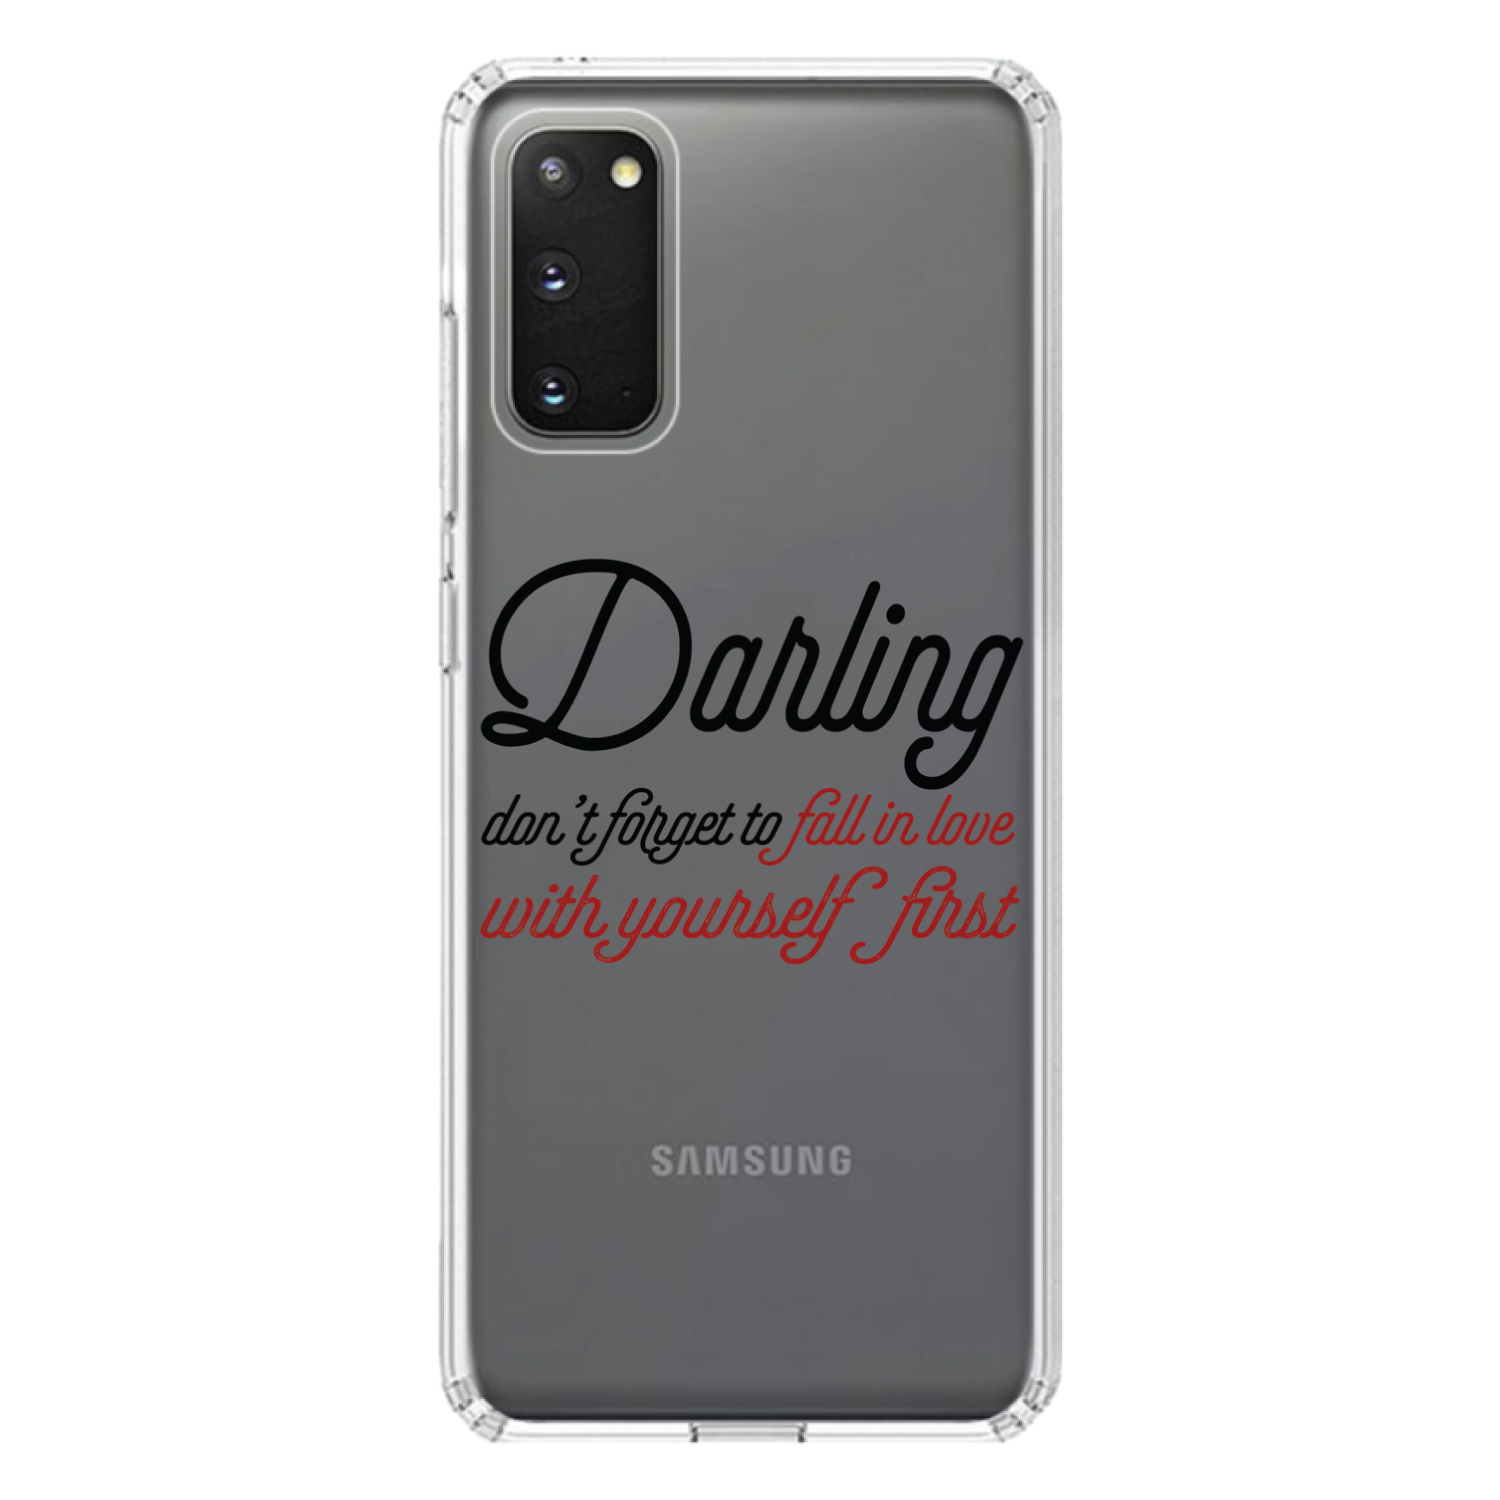 DistinctInk Clear Shockproof Hybrid Case for Galaxy S20 / S20 5G (6.2" Screen) - TPU Bumper Acrylic Back Tempered Glass Screen Protector - Darling Don't Forget to Fall In Love with Yourself - image 1 of 2